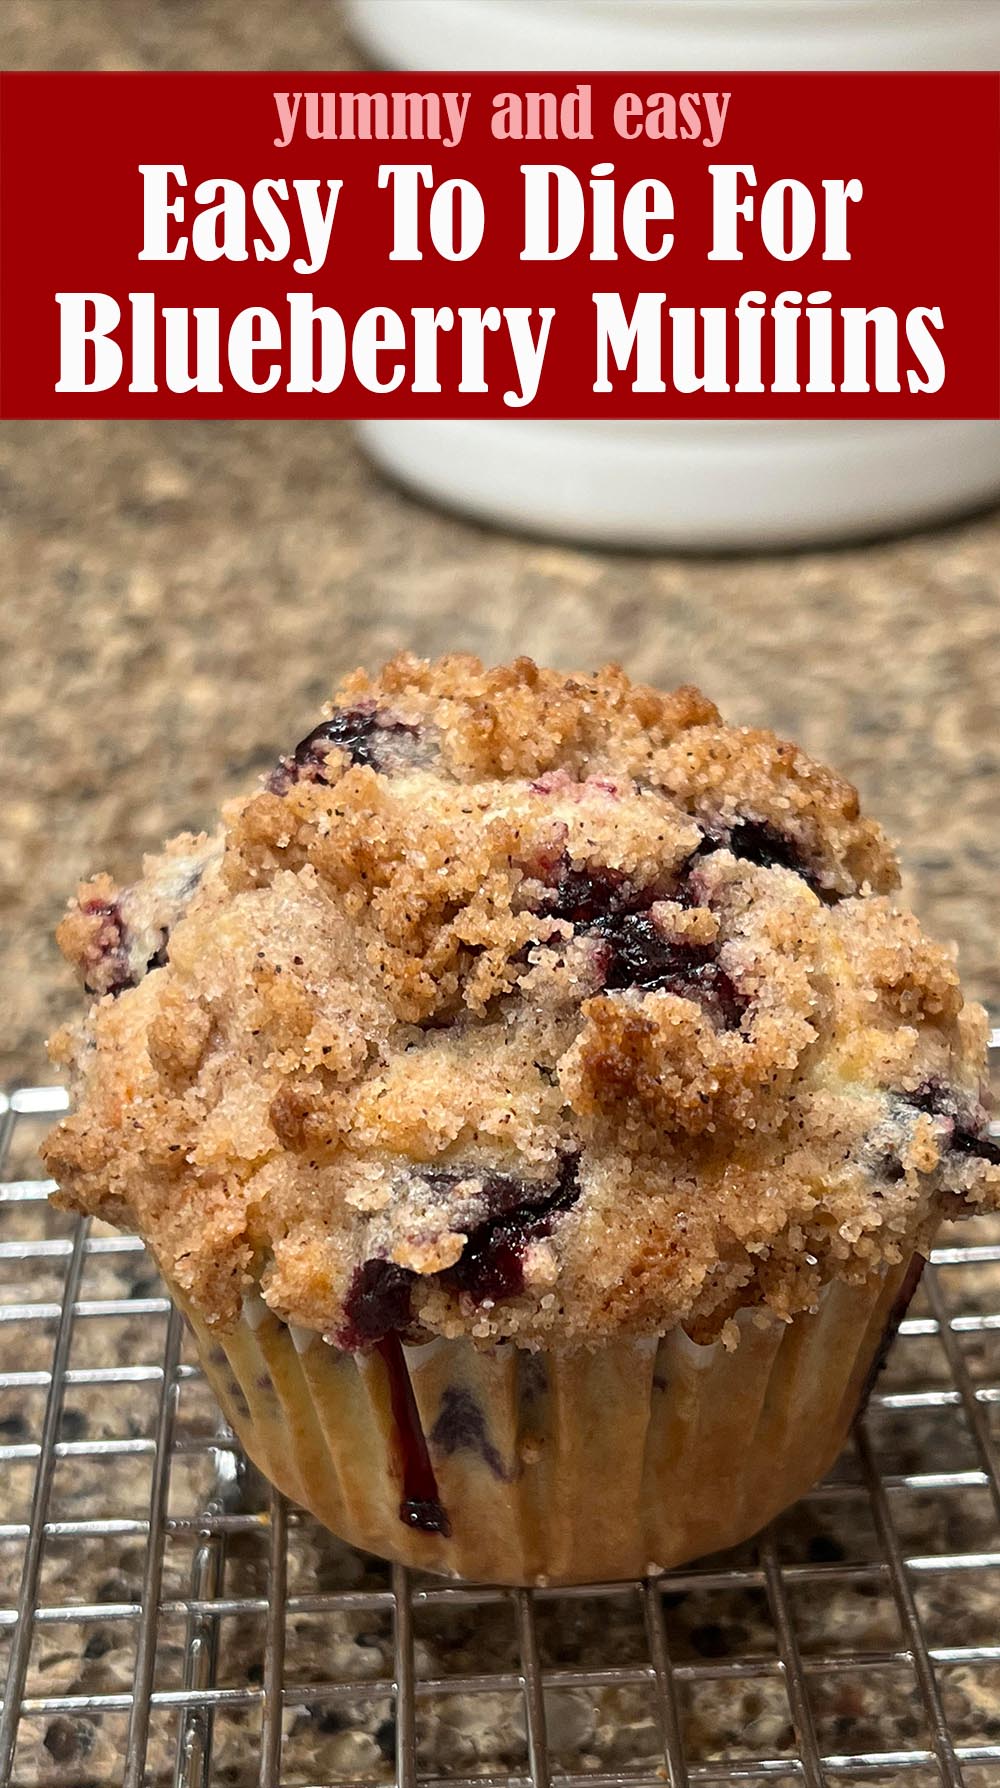 Easy To Die For Blueberry Muffins